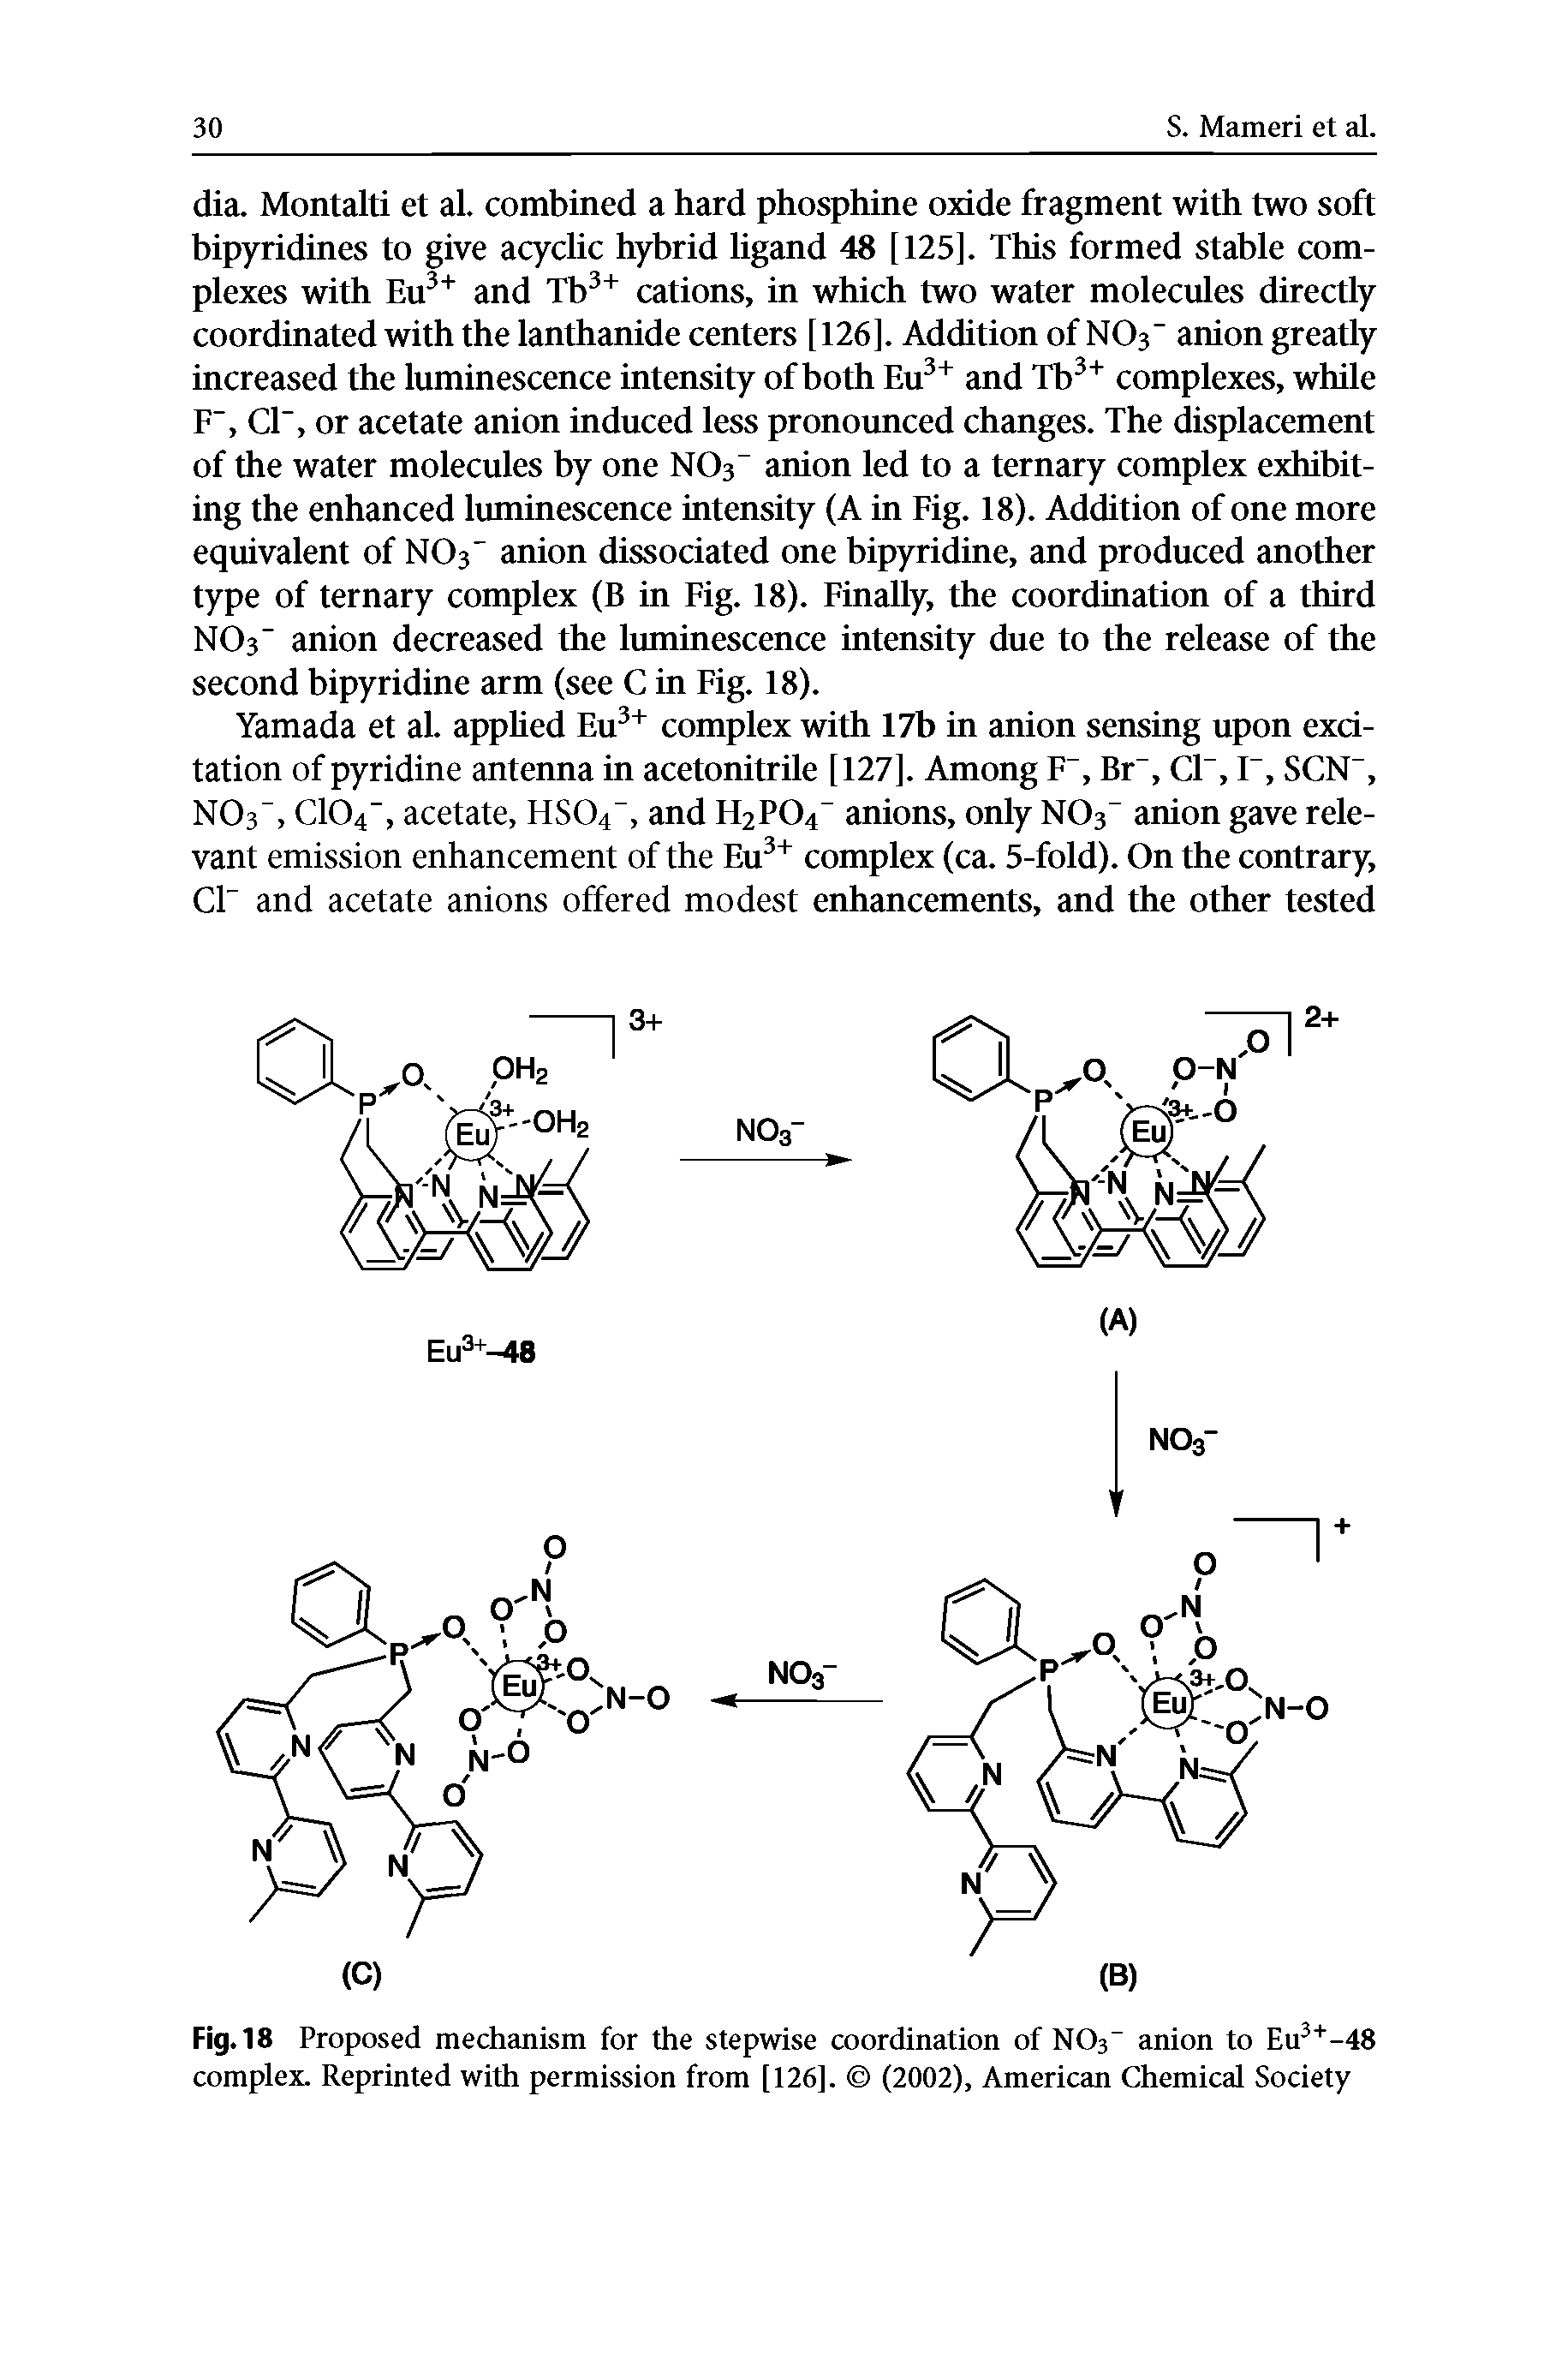 Fig.18 Proposed mechanism for the stepwise coordination of NO3 anion to Eu -48 complex. Reprinted with permission from [126], (2002), American Chemical Society...